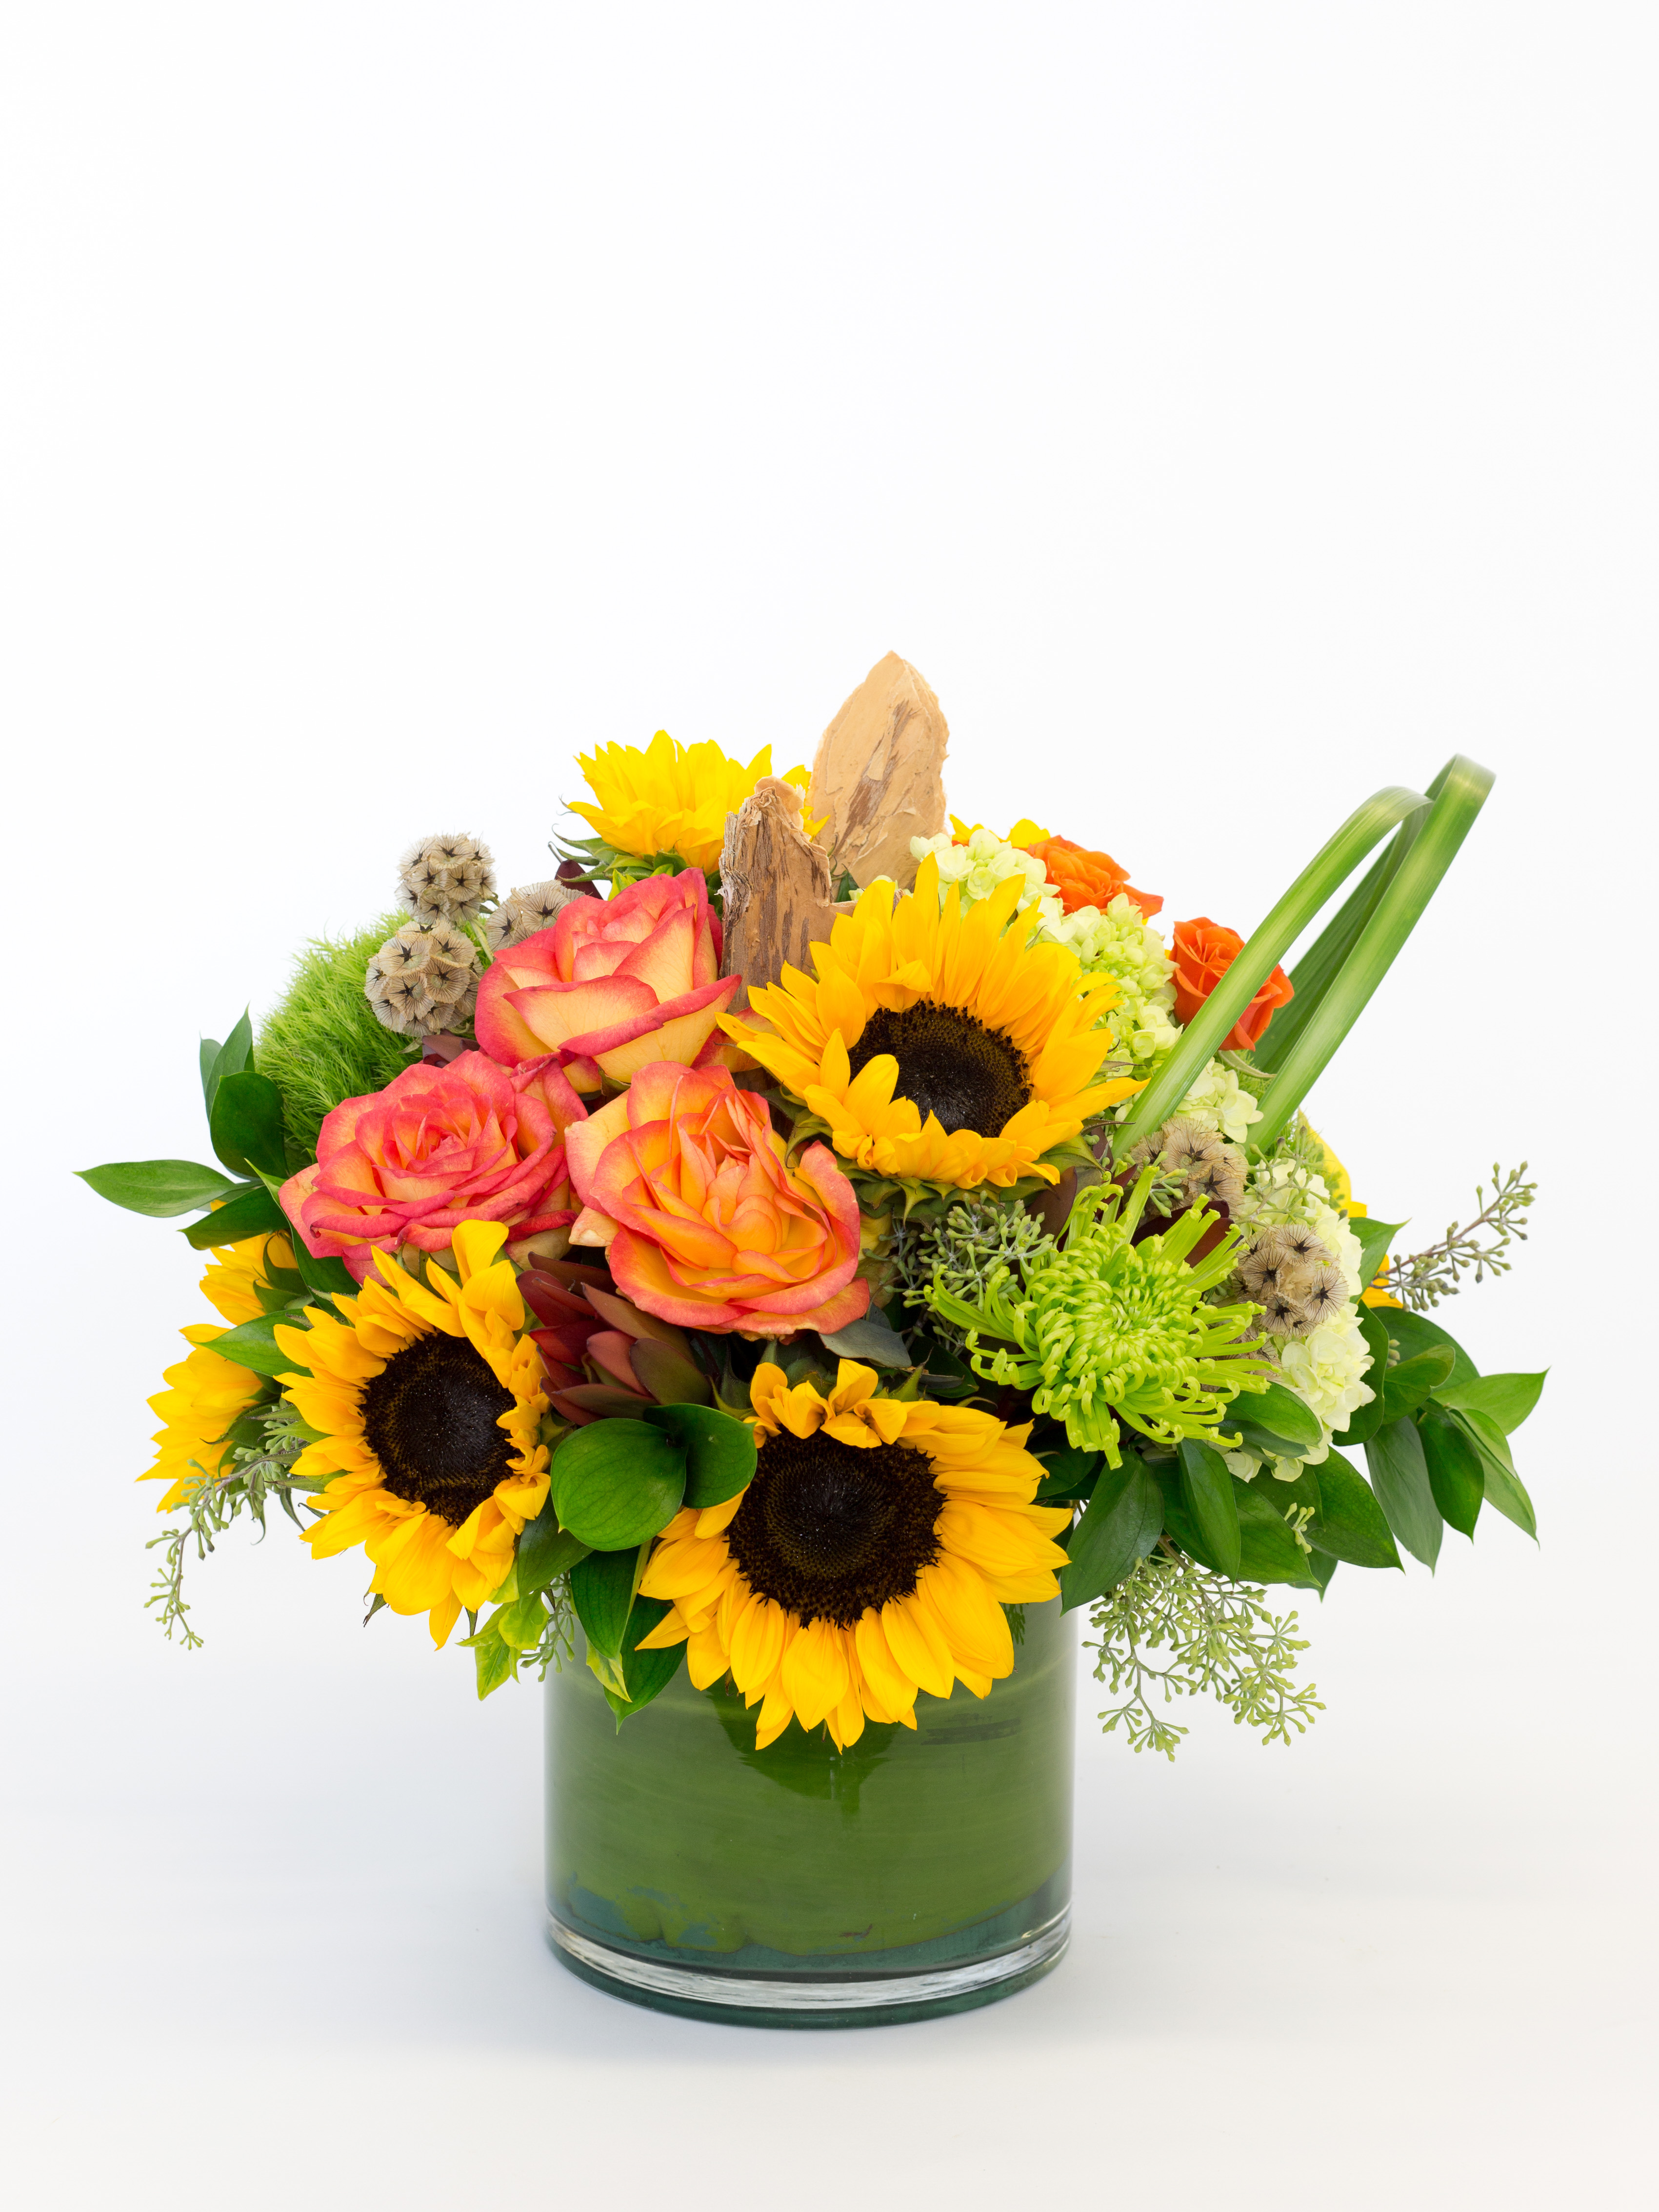 norcross florist - same day flower delivery to norcross georgia